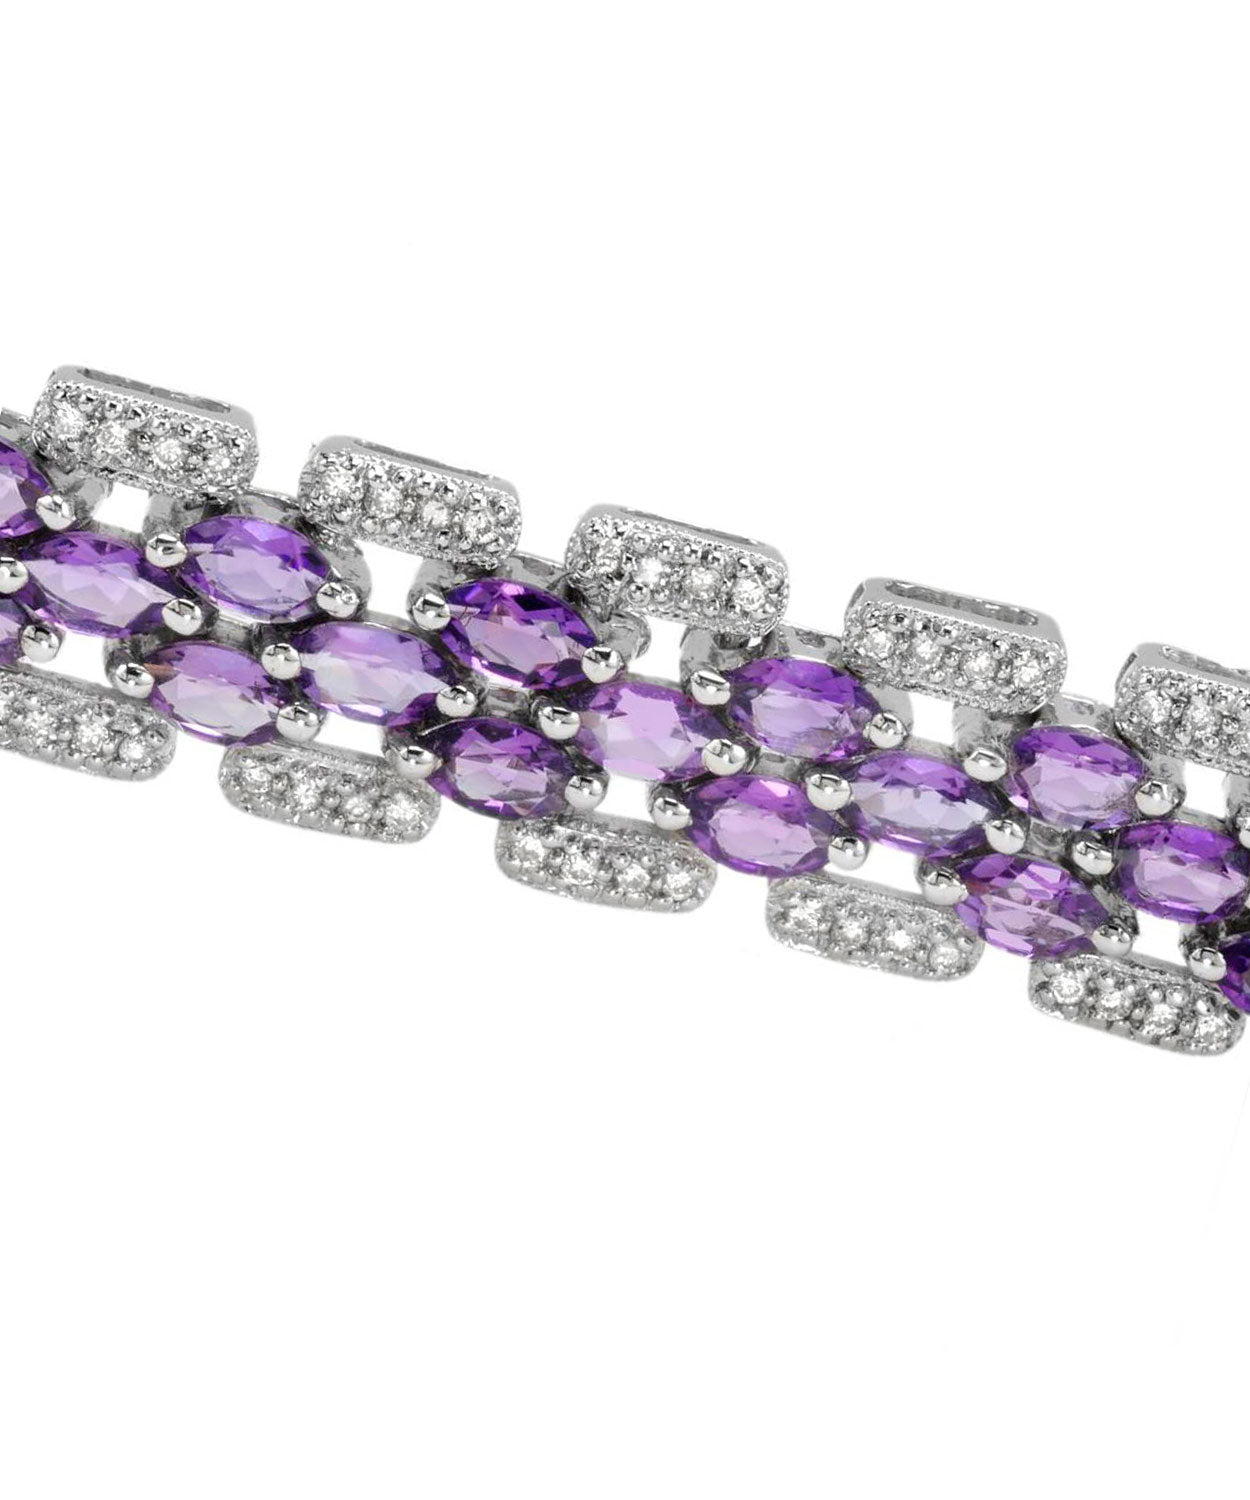 Allure Collection 9.94 ctw Natural Amethyst and Diamond 14k Gold Statement Link Bracelet View 3